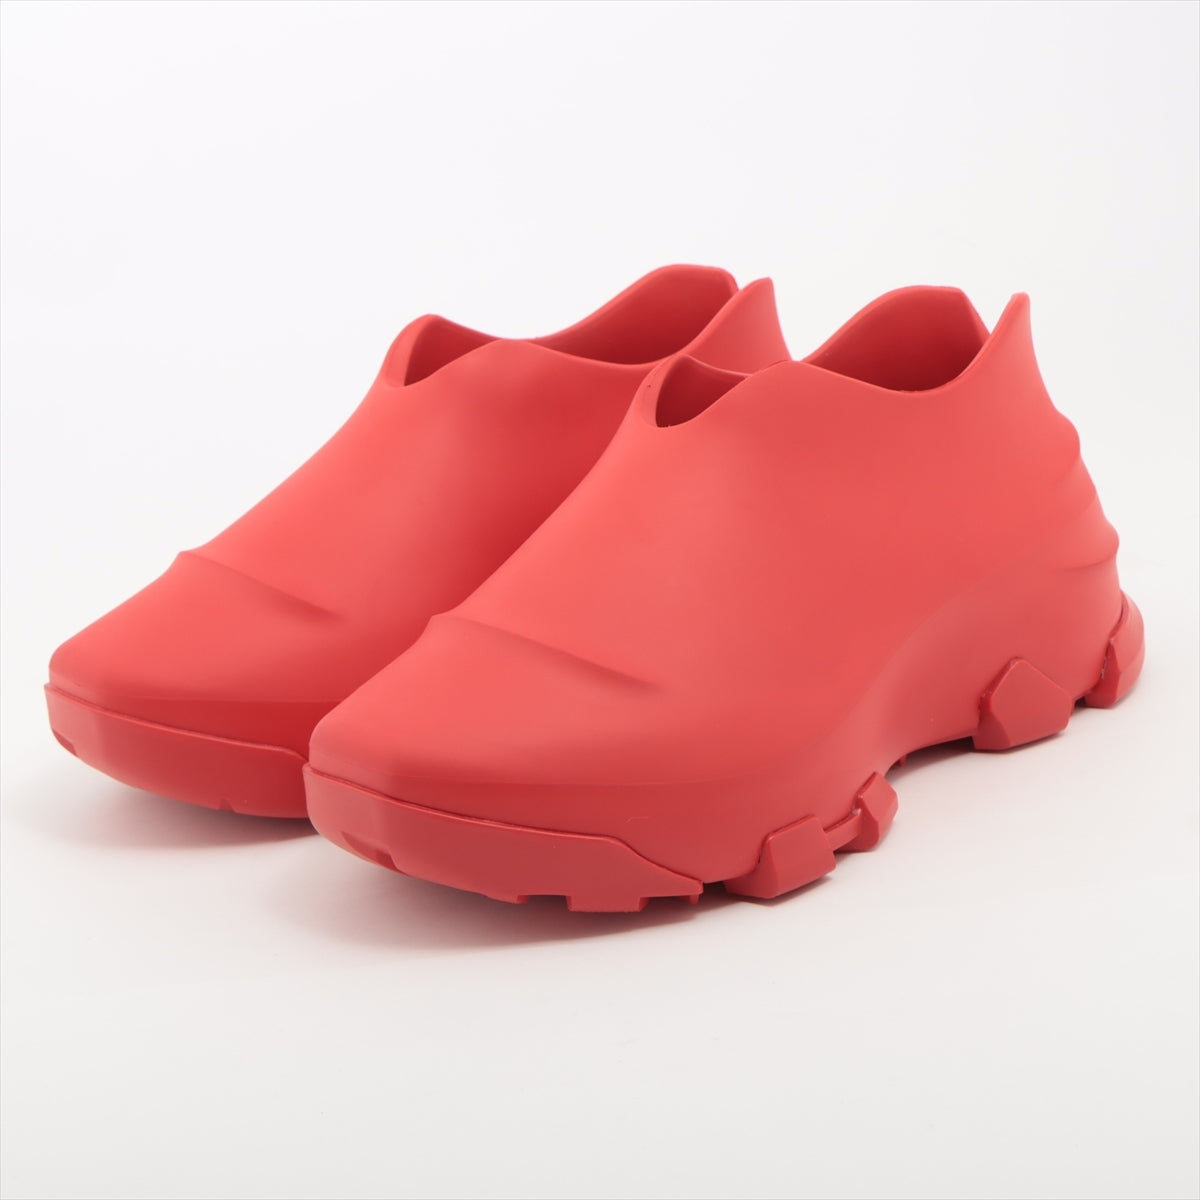 Givenchy Rubber Sneakers 41 Men's Red Monumental Mallow box There is a bag